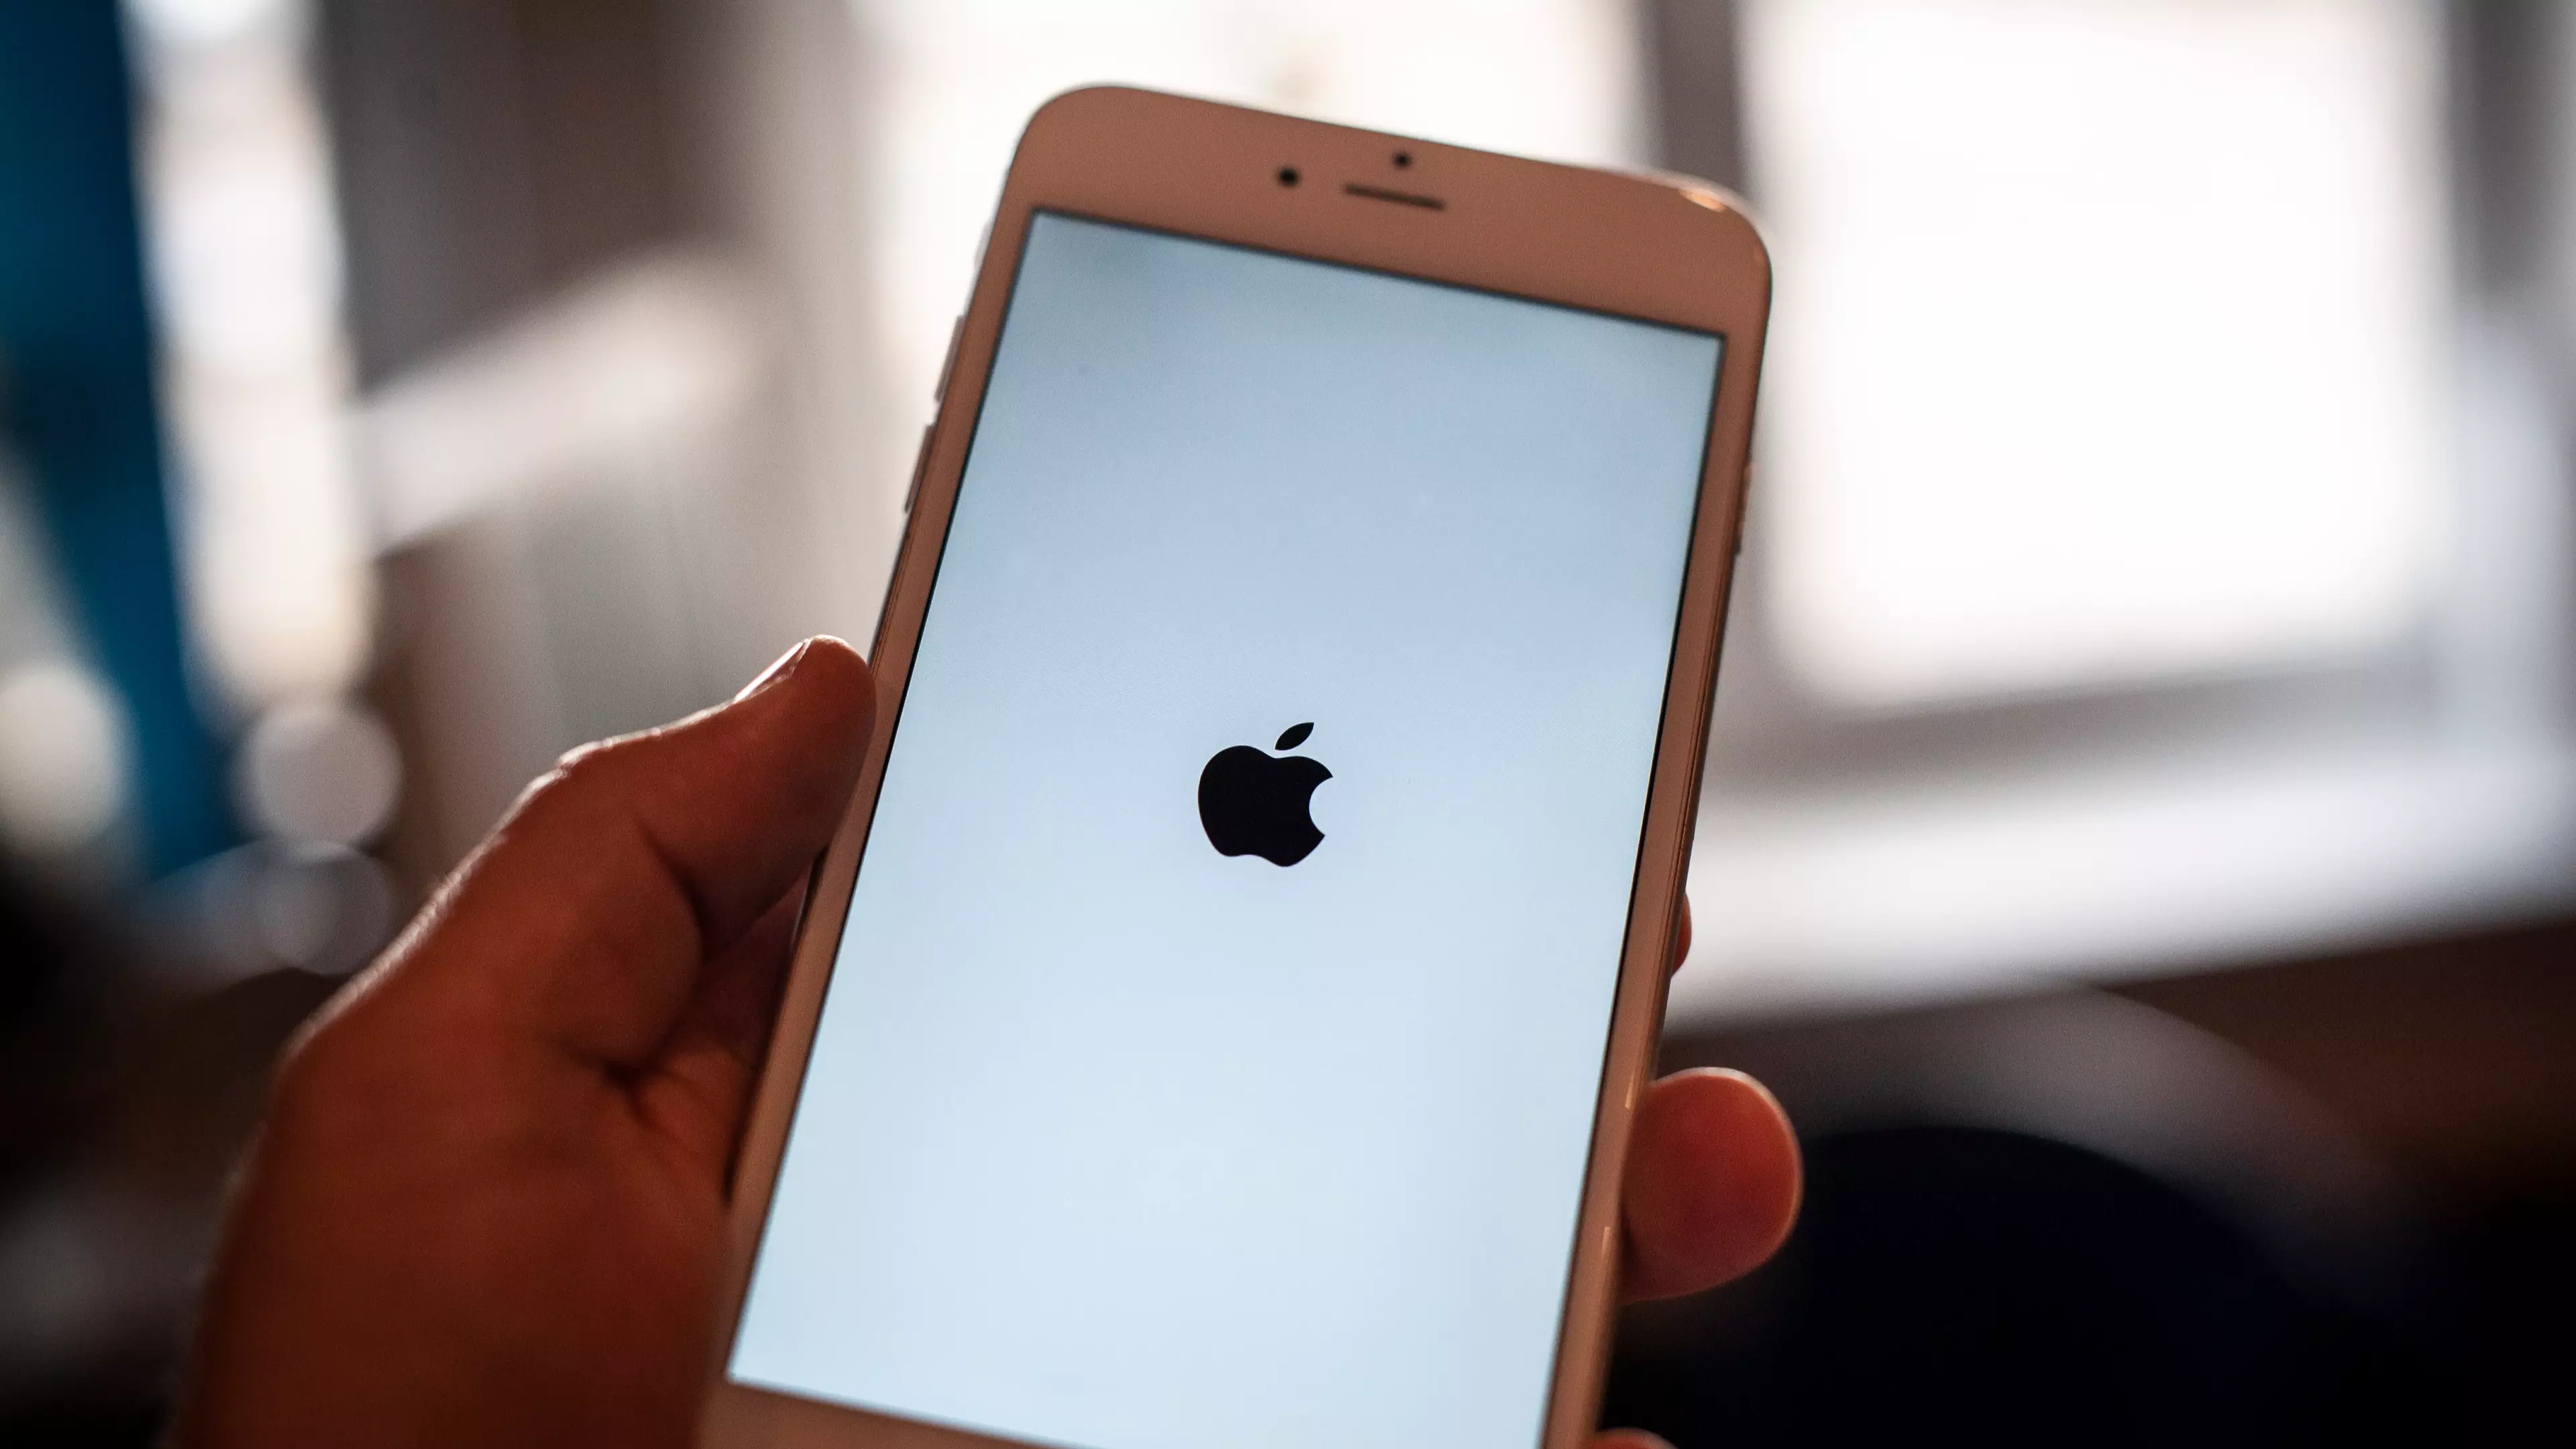 Apple Offers Cheap New Batteries If You Have An iPhone 6 Or Later Model